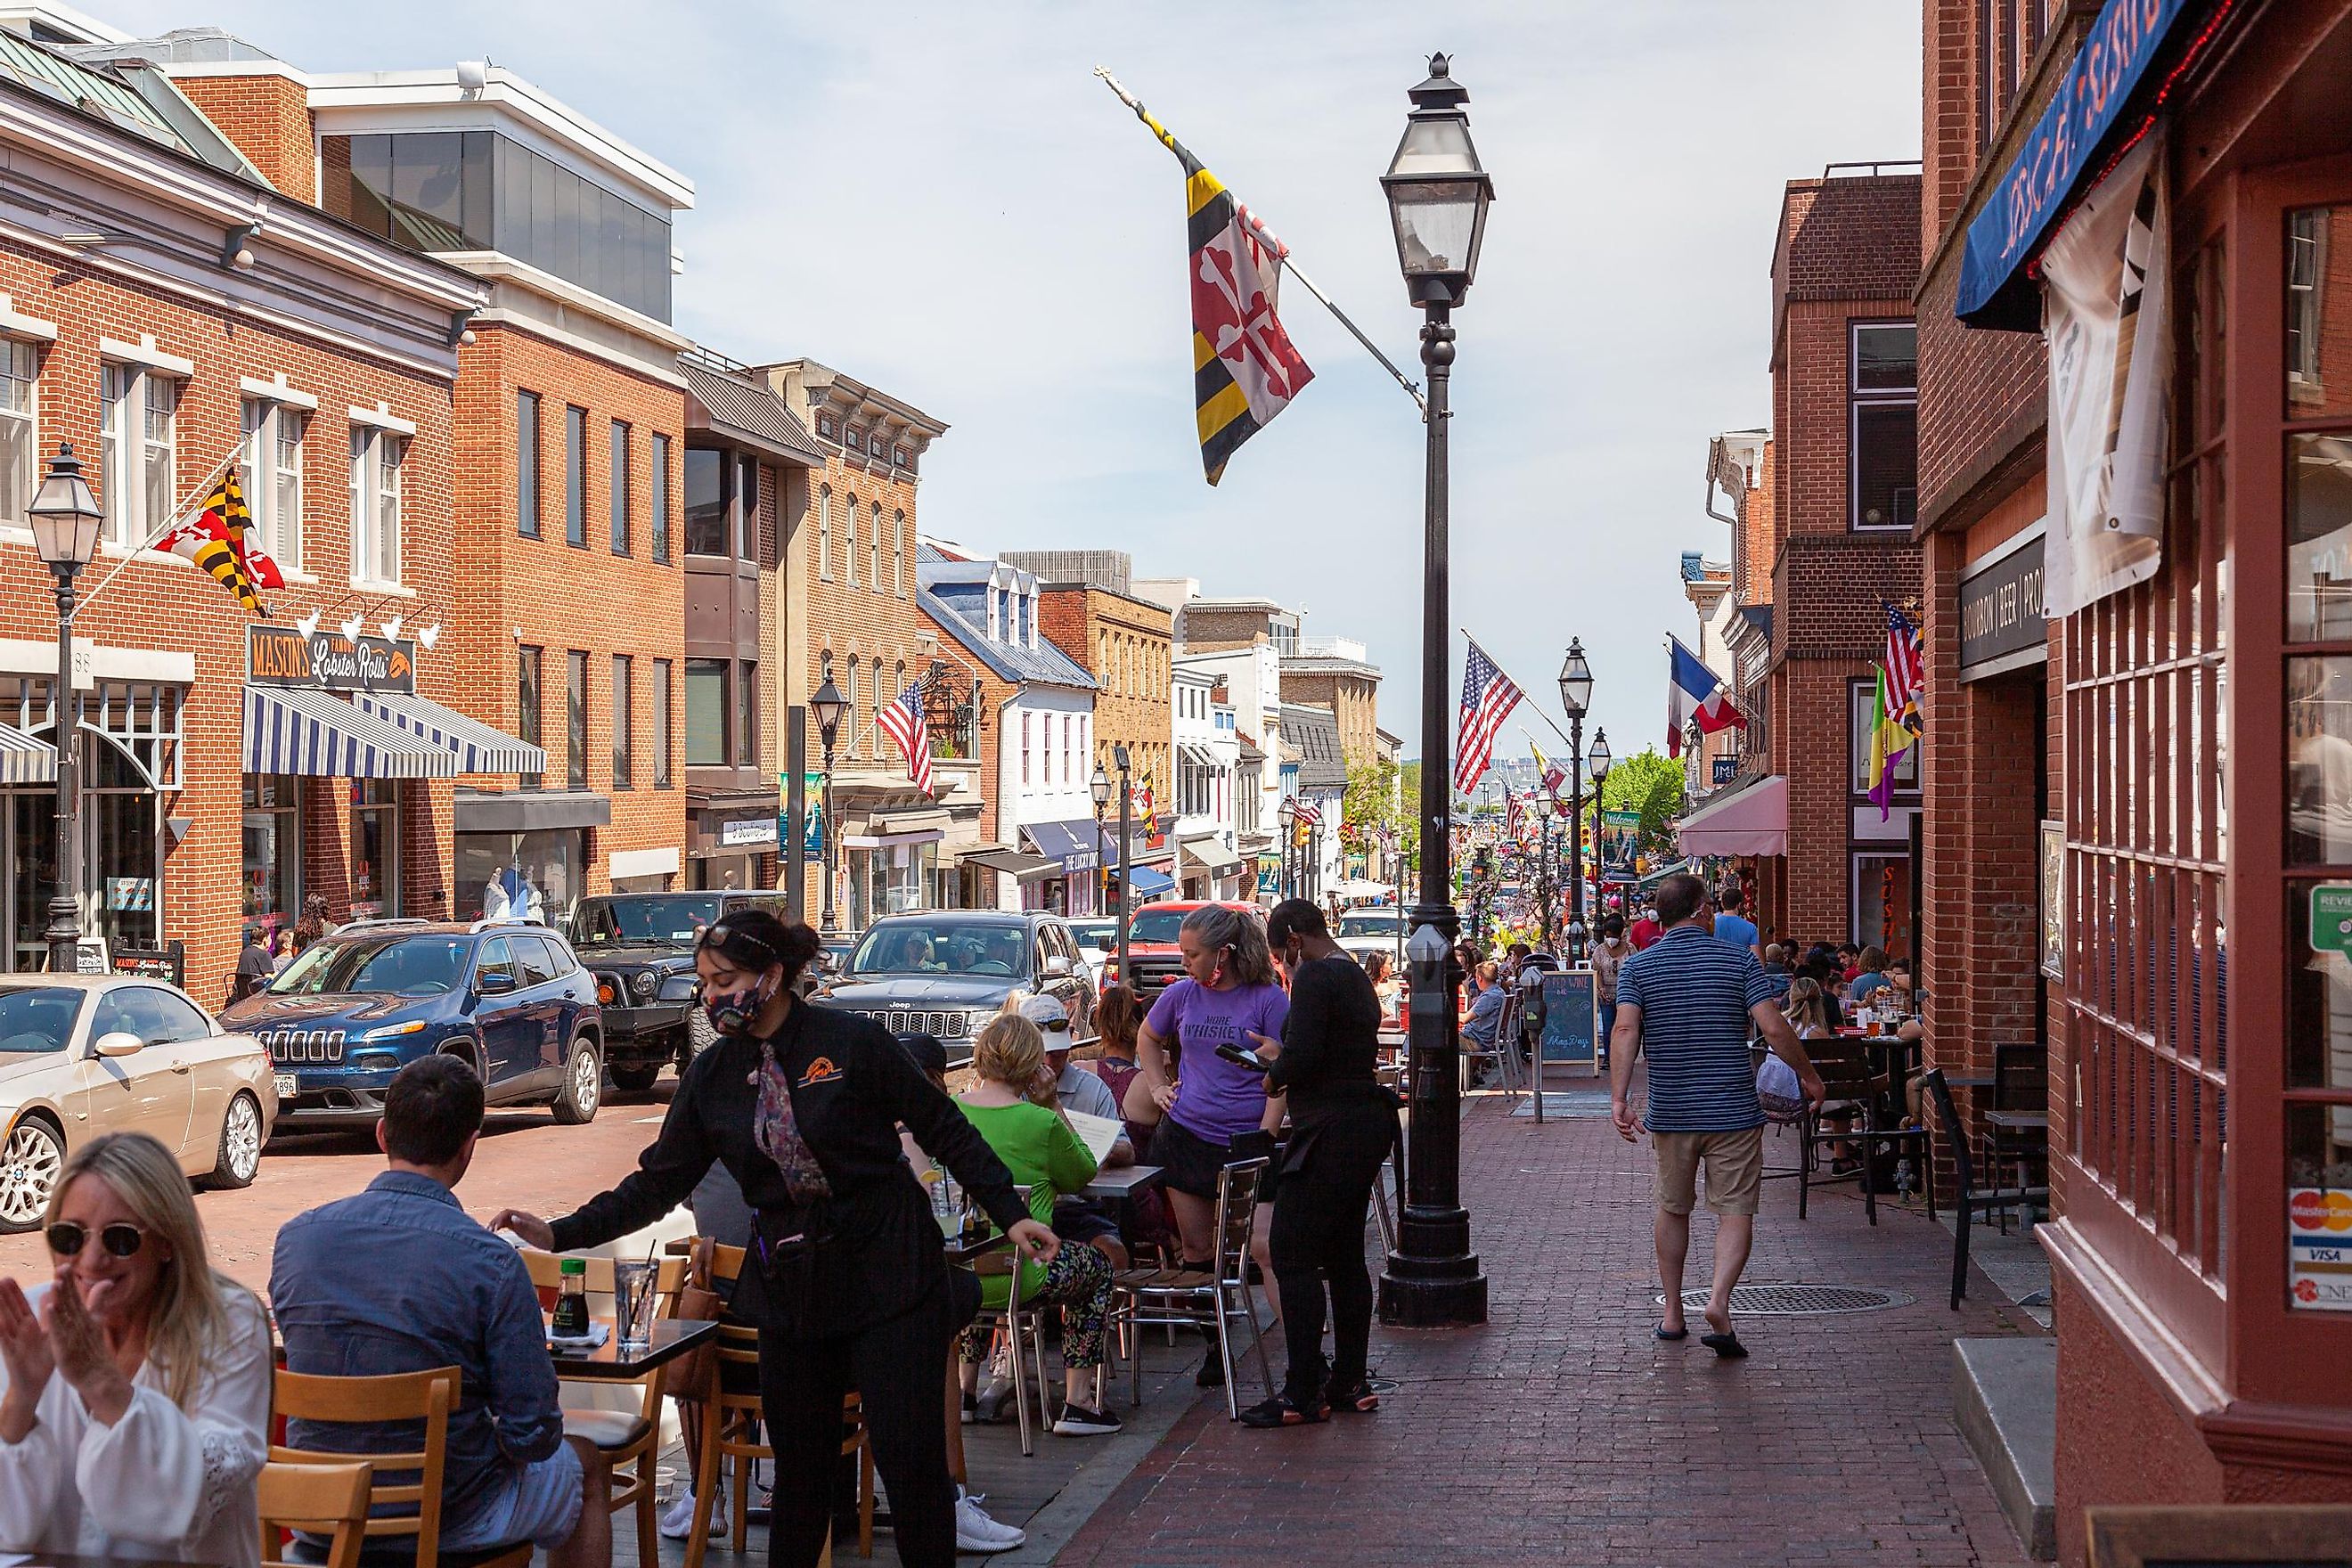 Downtown street view of Annapolis, Maryland. Image credit grandbrothers via Shutterstock